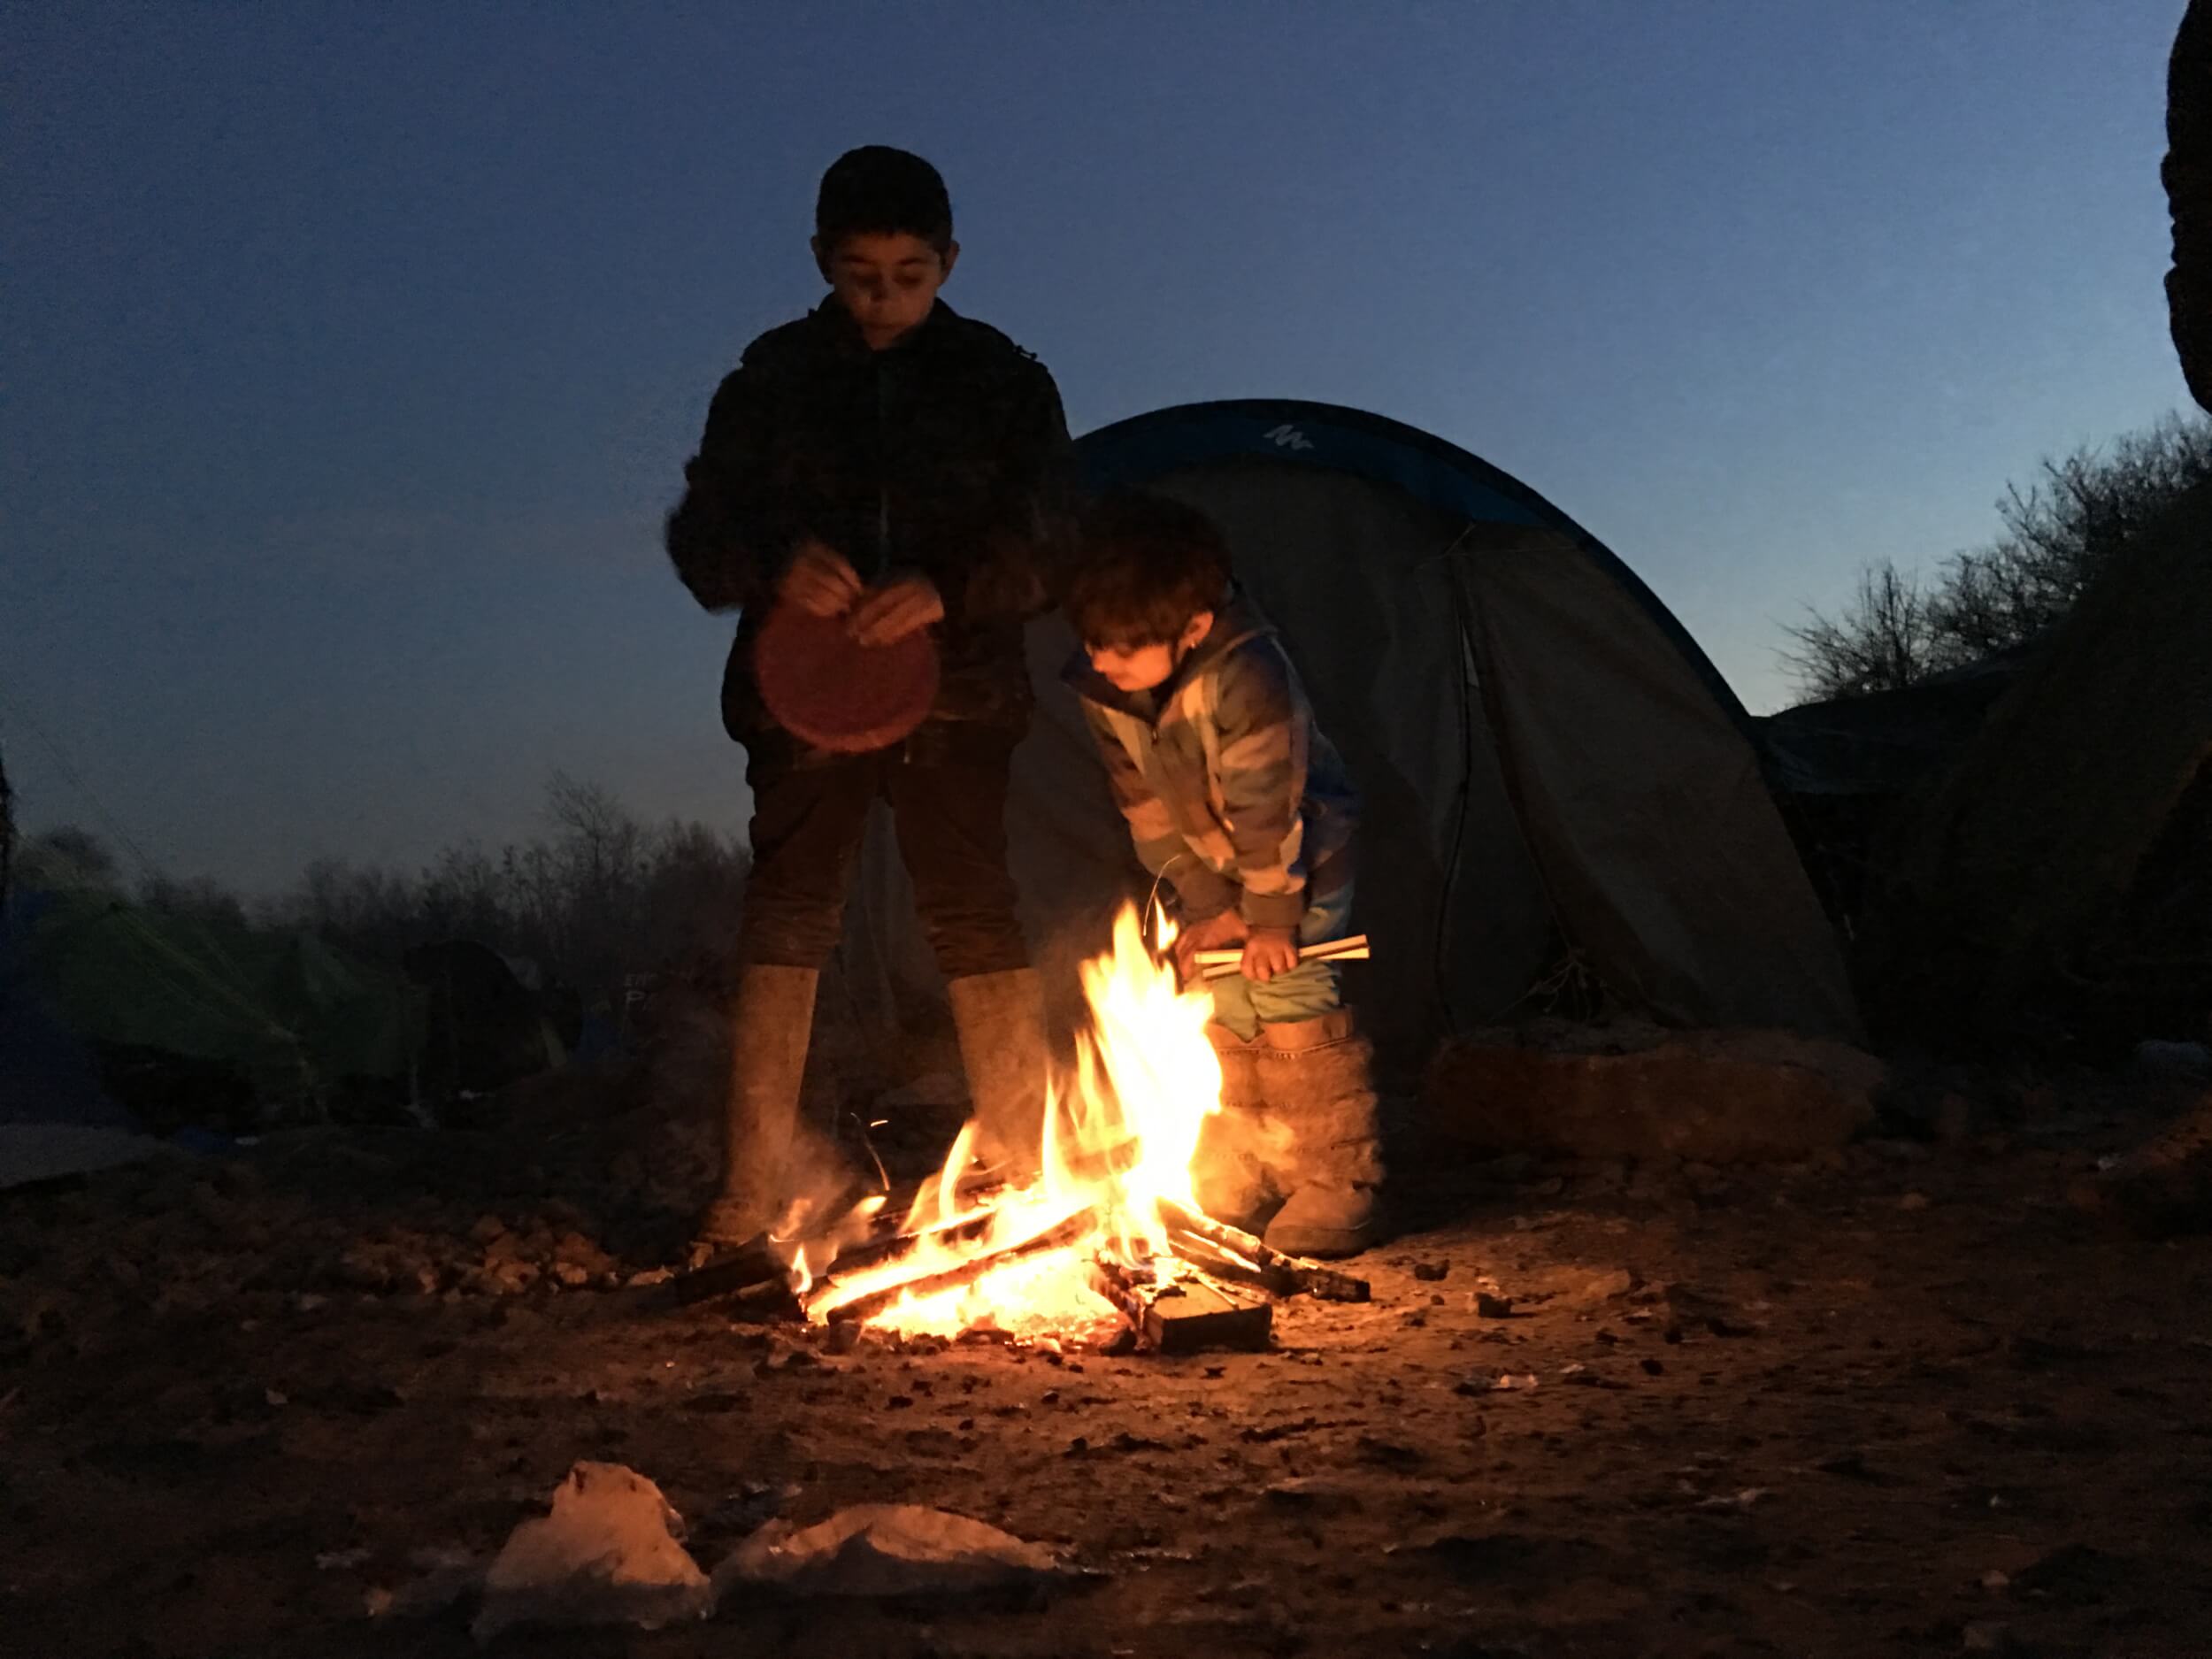 Anas, 10, and Shadi, 6 look on to a fire next to their tent. They have been in Grande-Synthe for eleven days. (Photo: Katherine Schwartz)